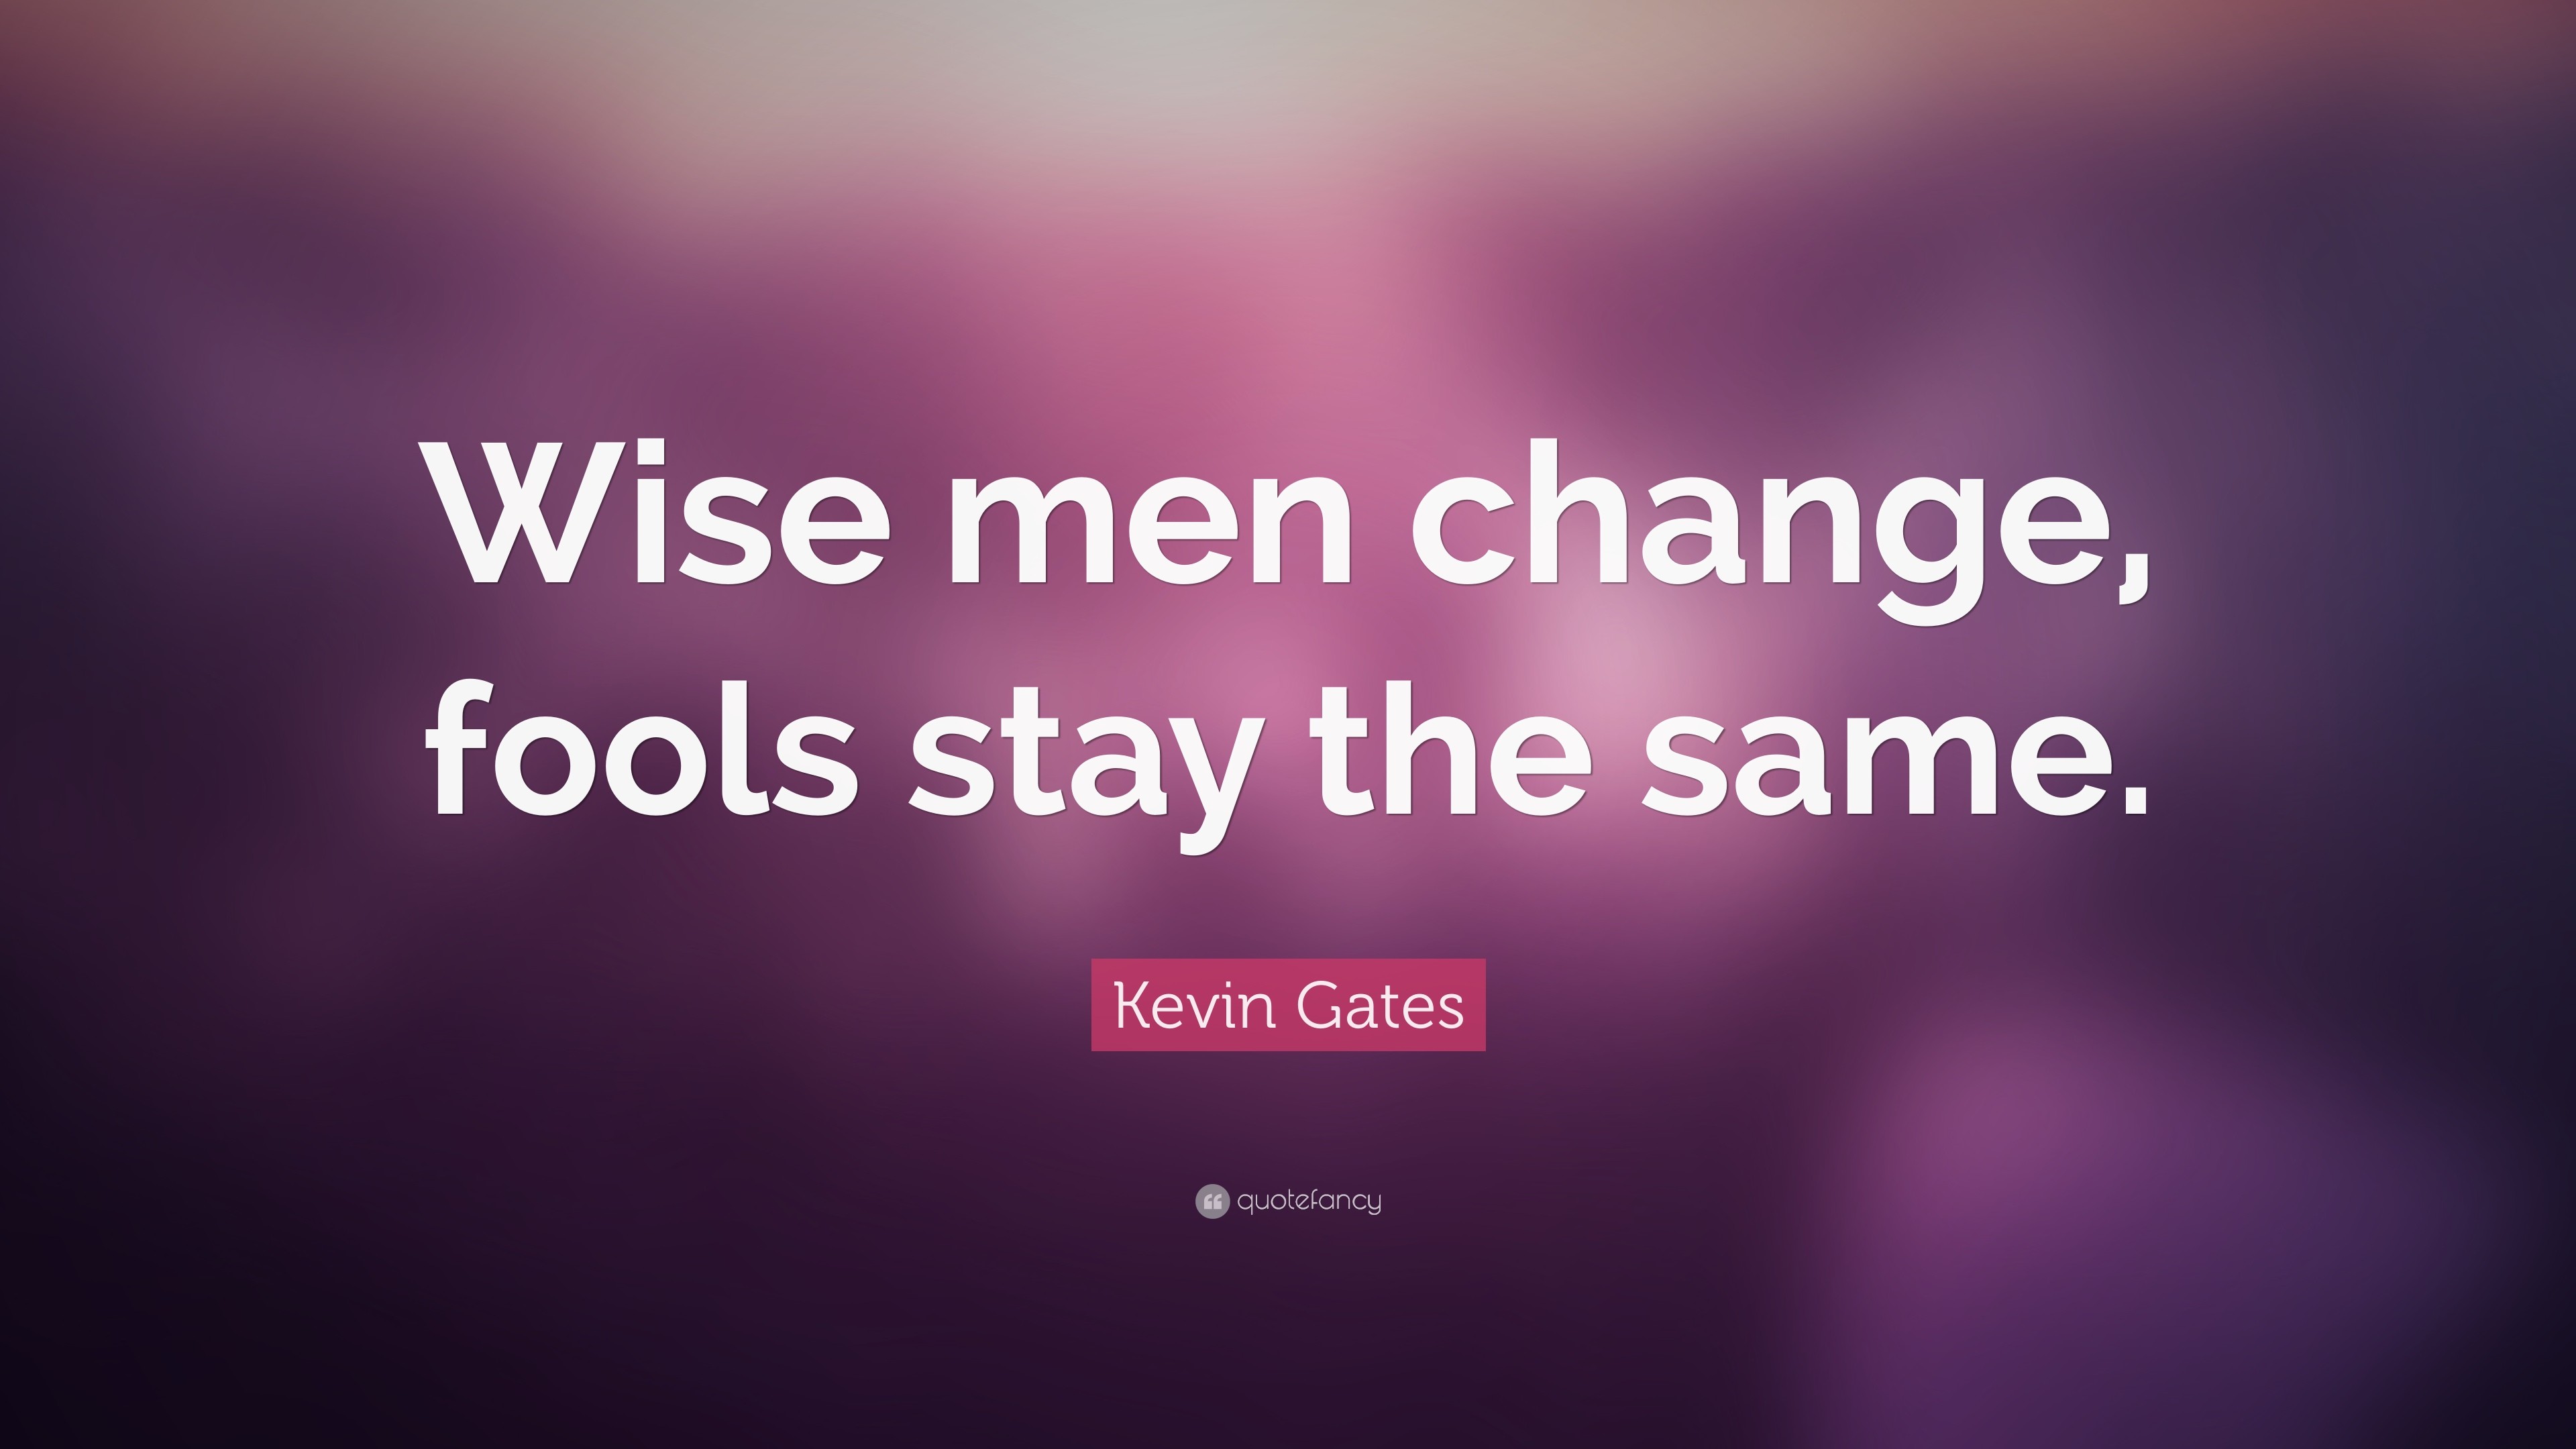 3840x2160 Kevin Gates Quote: “Wise men change, fools stay the same.”